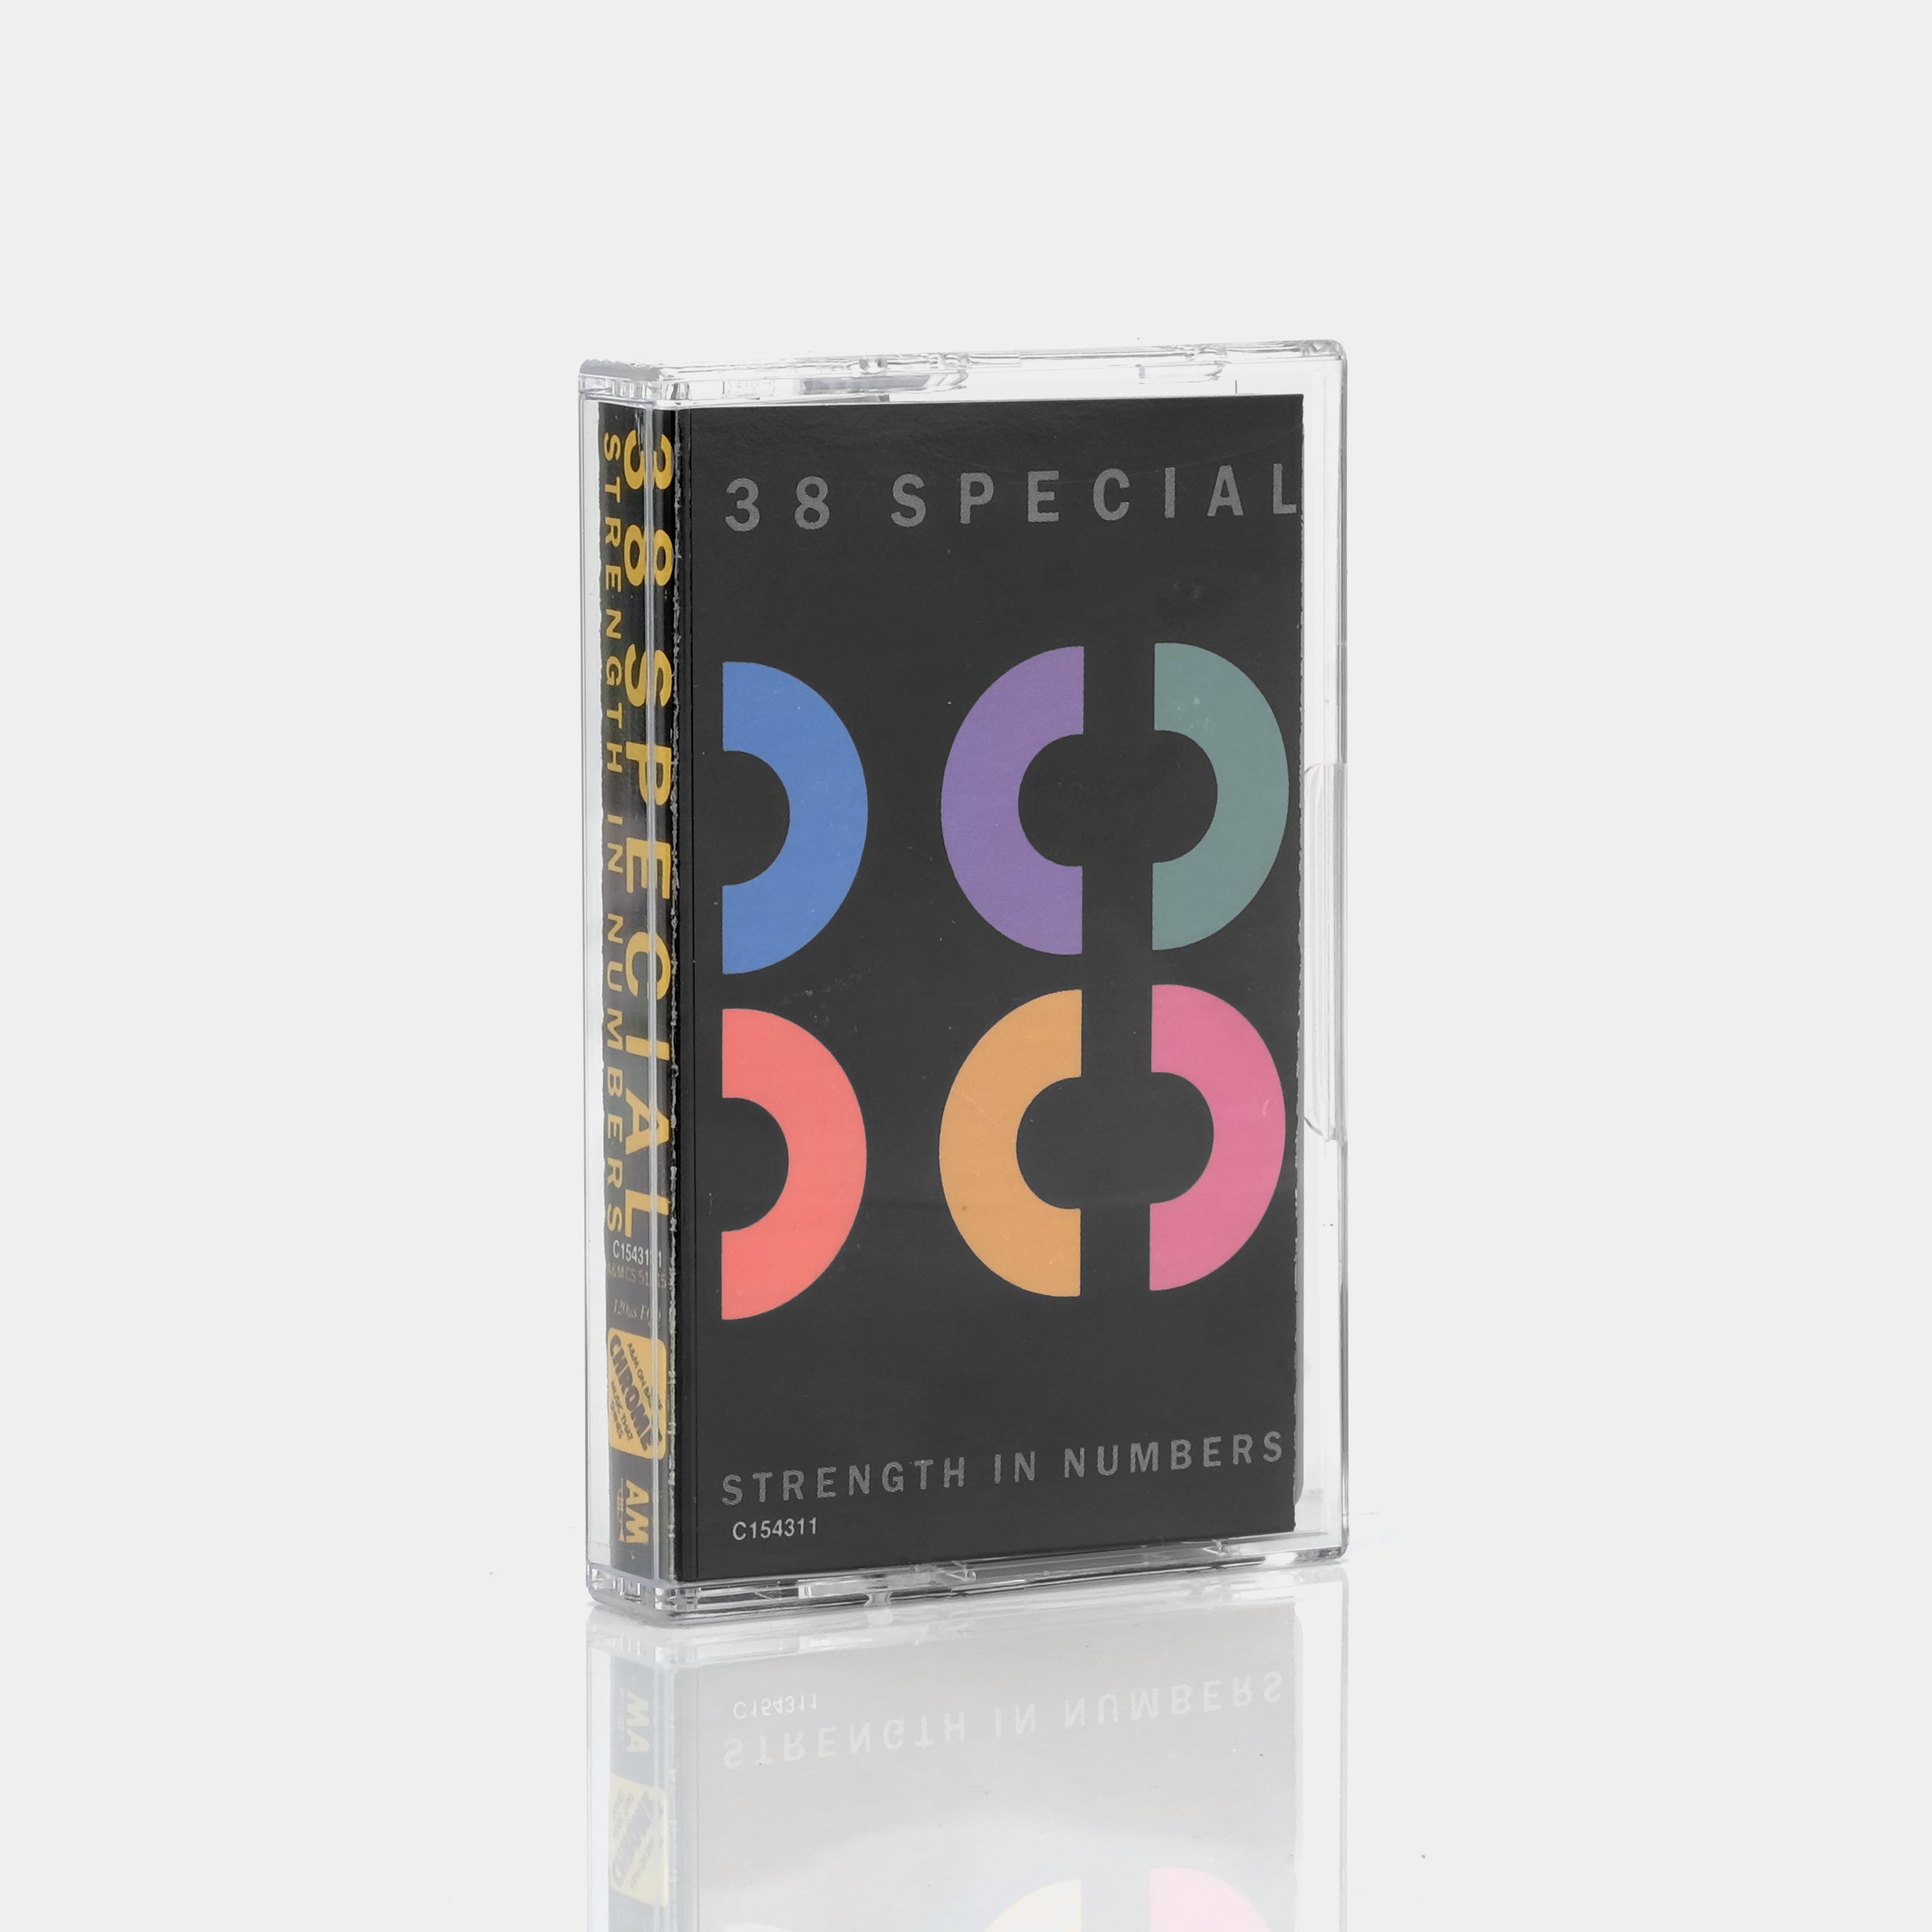 38 Special - Strength In Numbers Cassette Tape